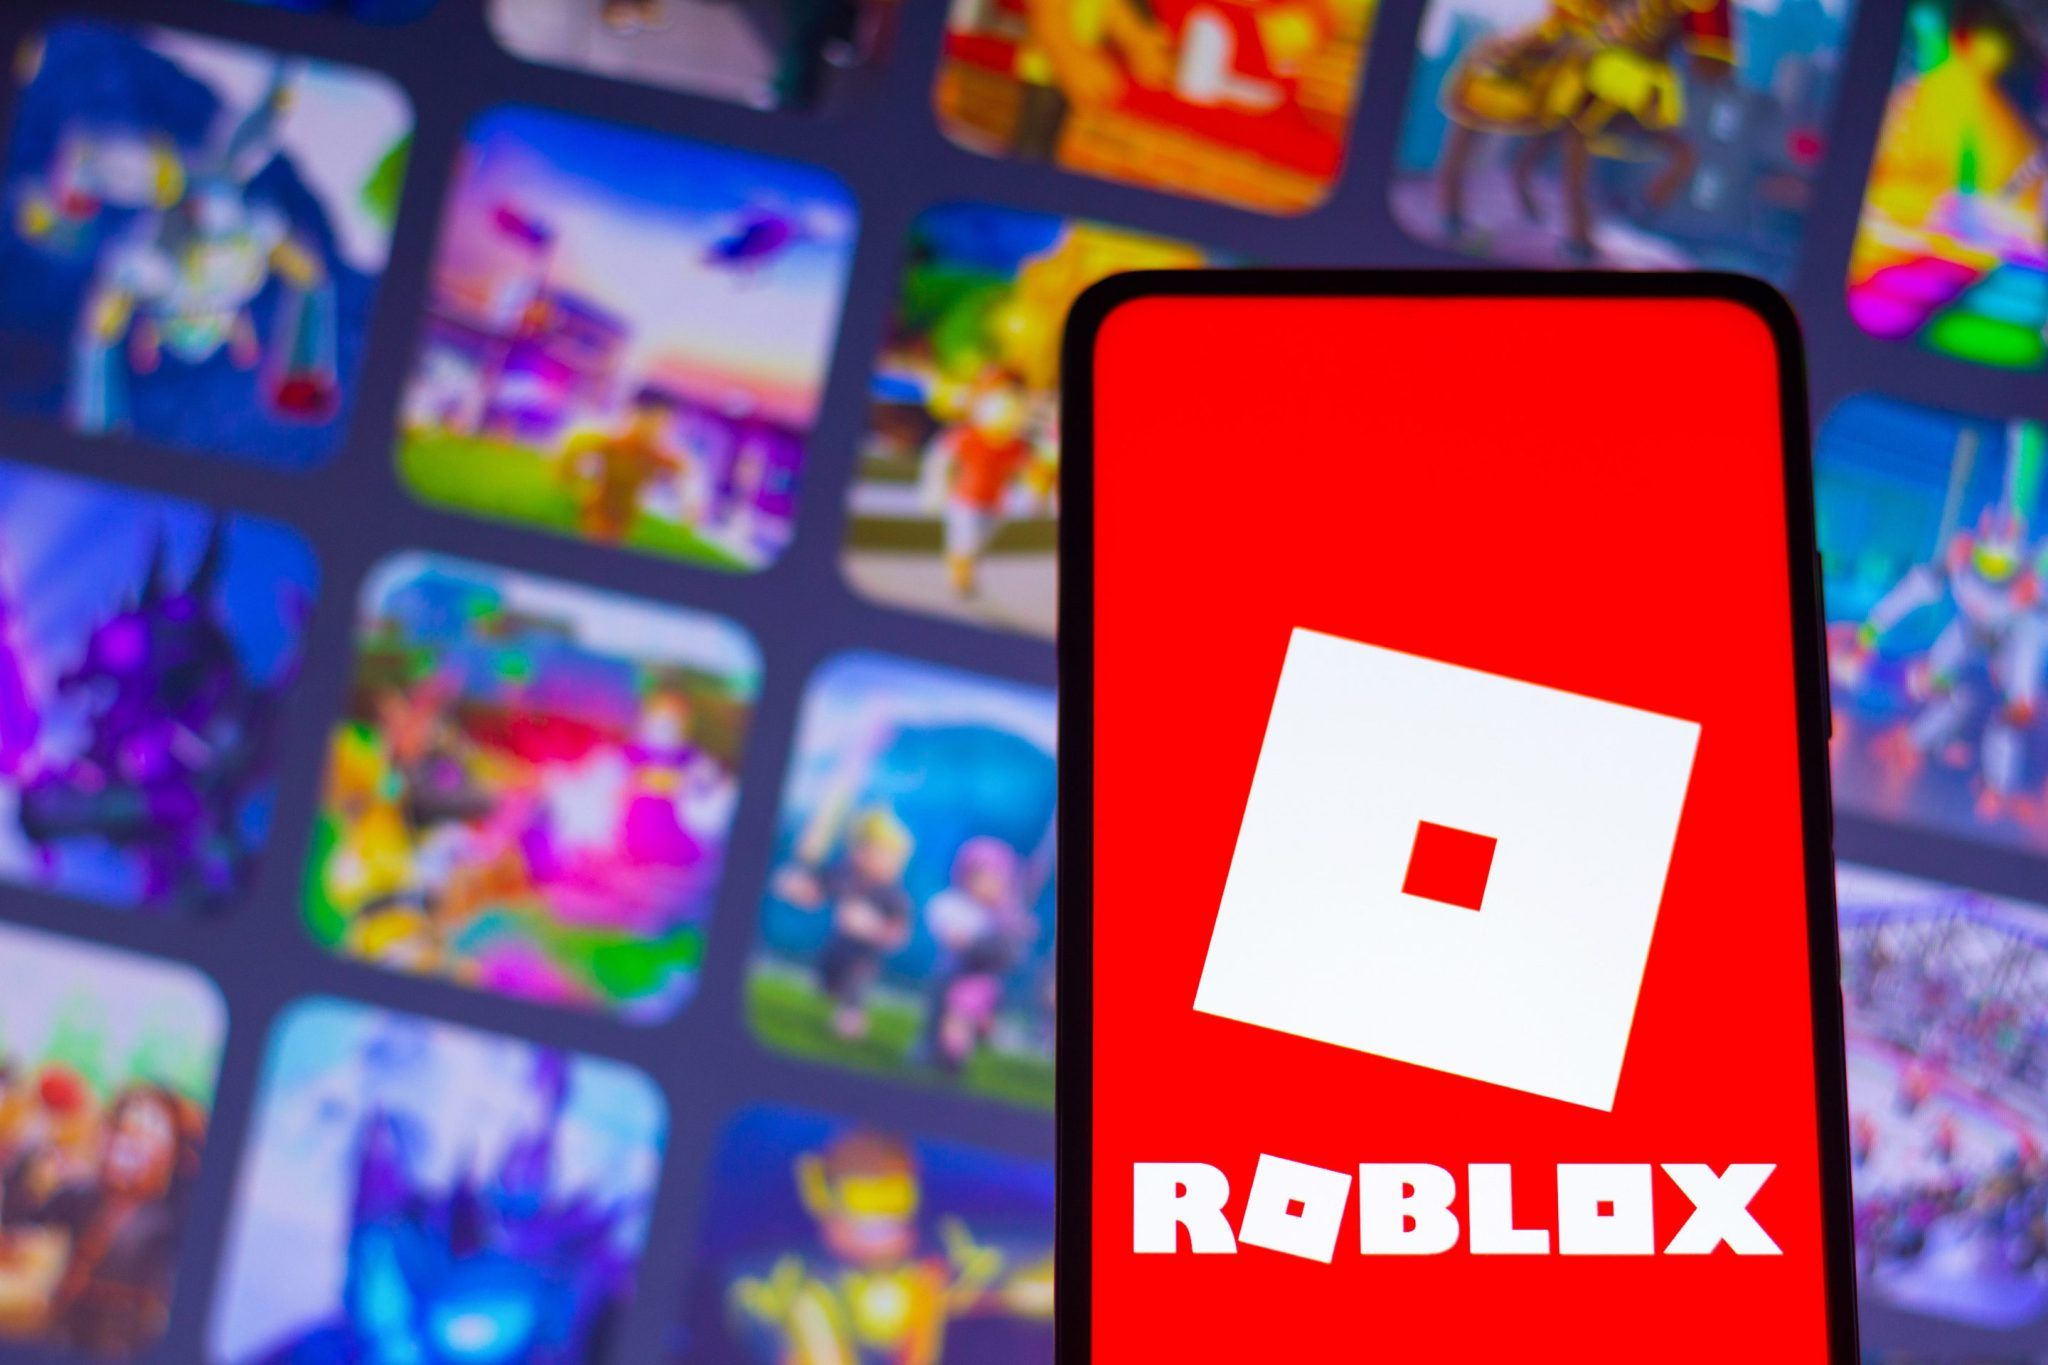 Sir Elton John says Roblox and the metaverse are perfect for the next stage  of his life